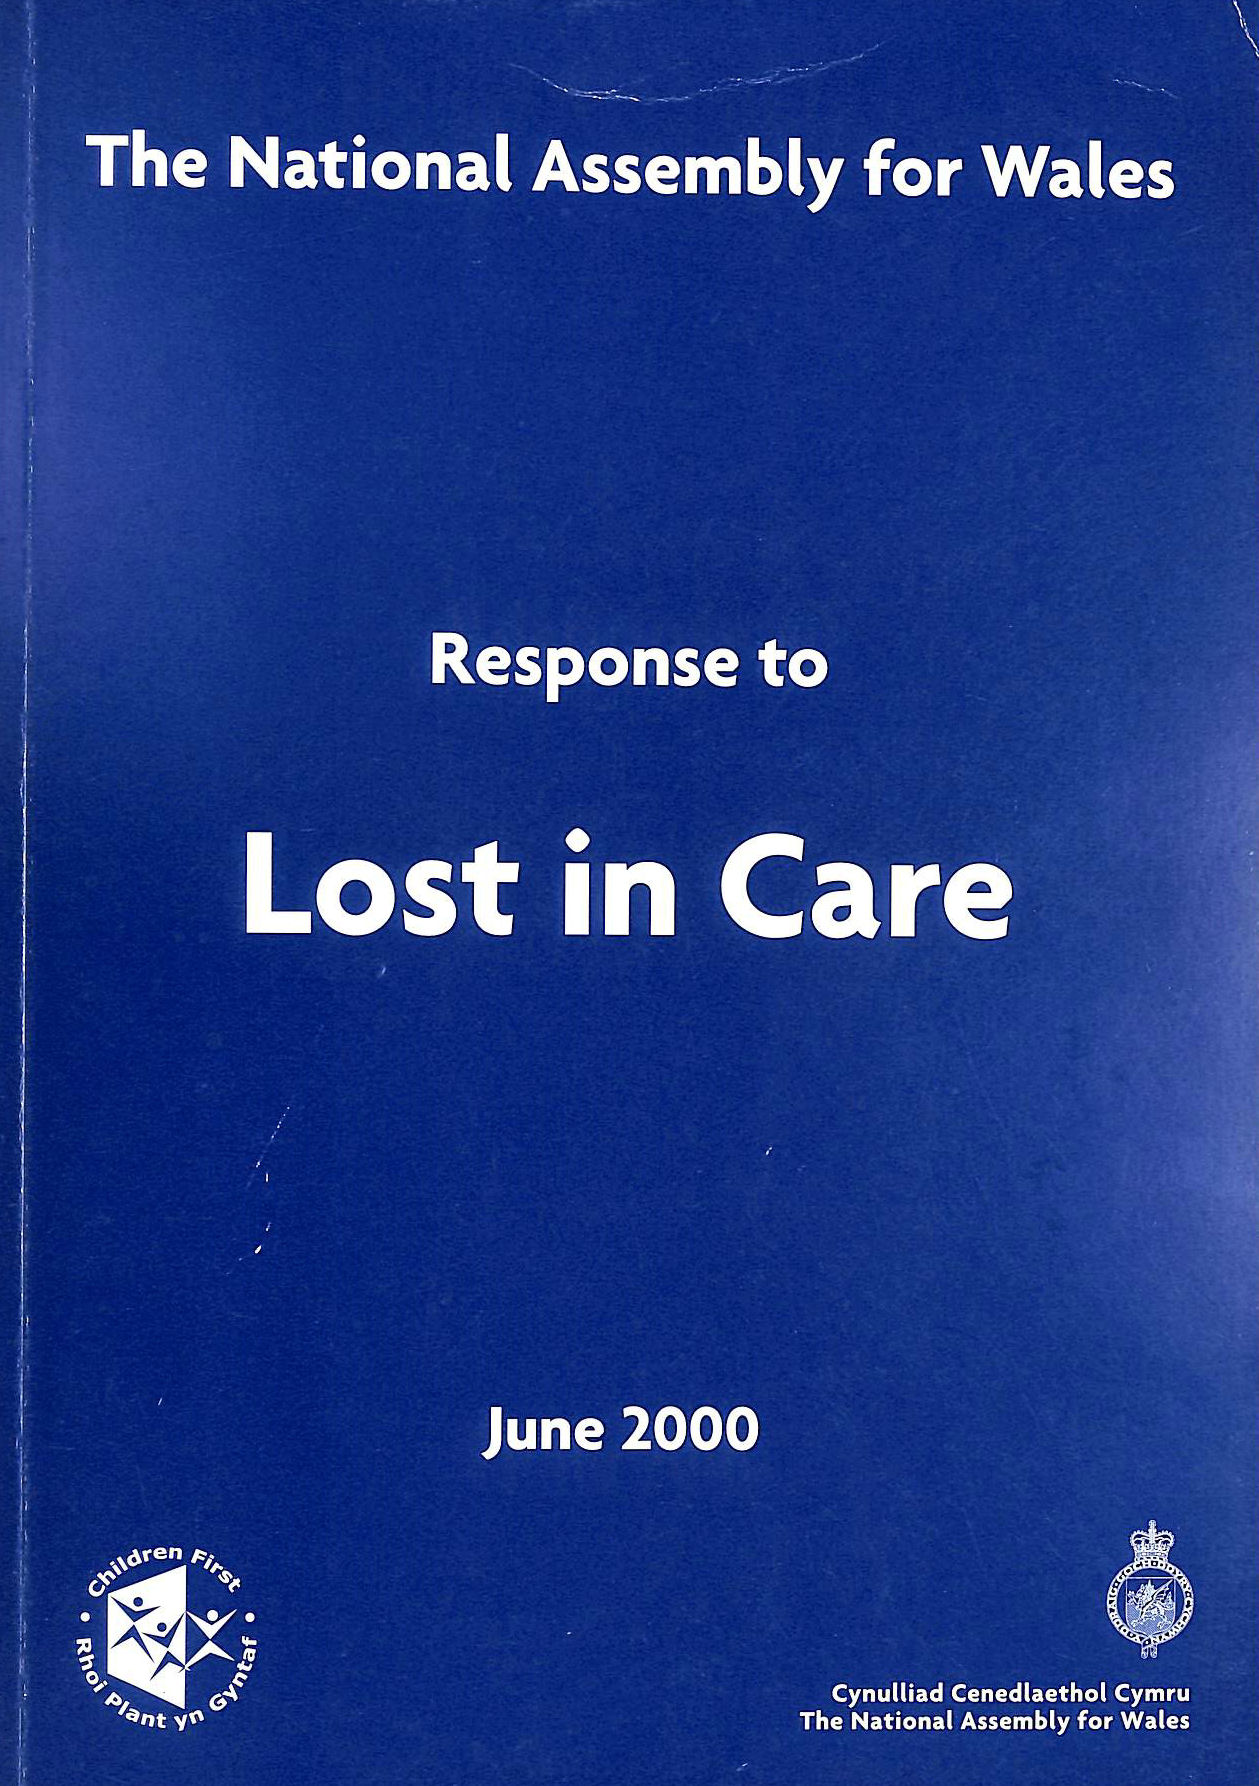 THE NATIONAL ASSEMBLY FOR WALES - Respose to Lost in Care, The National Assembly for Wales